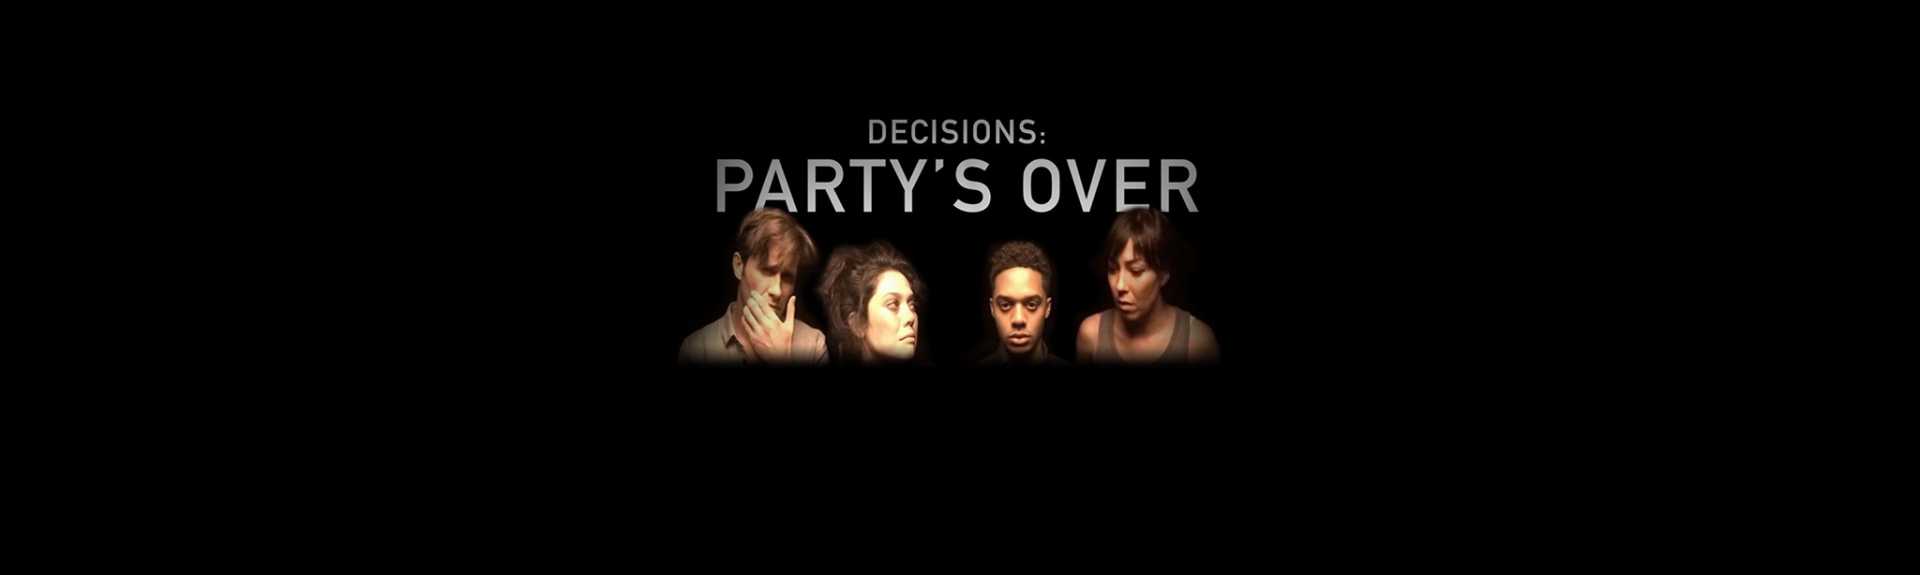 Decisions: Party’s Over